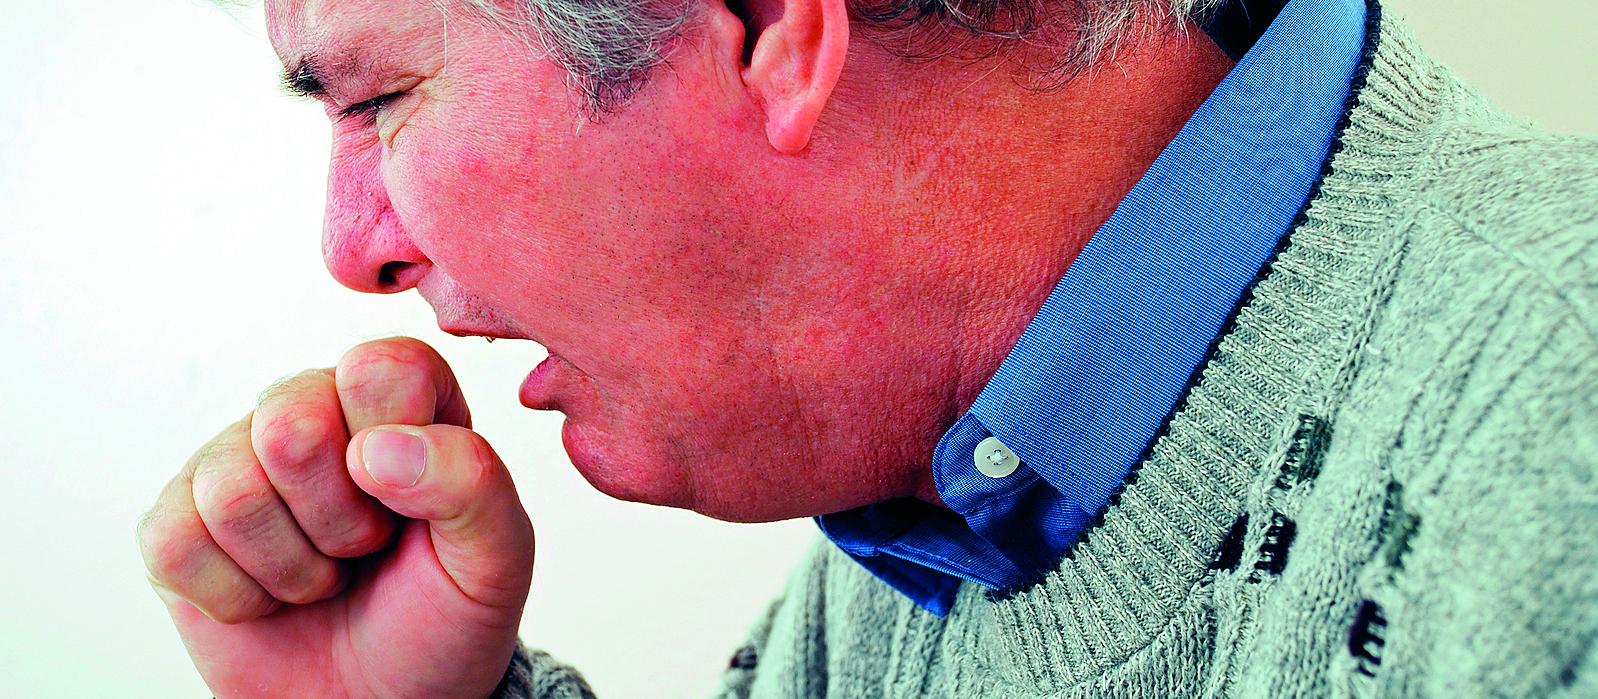 Man with cough 